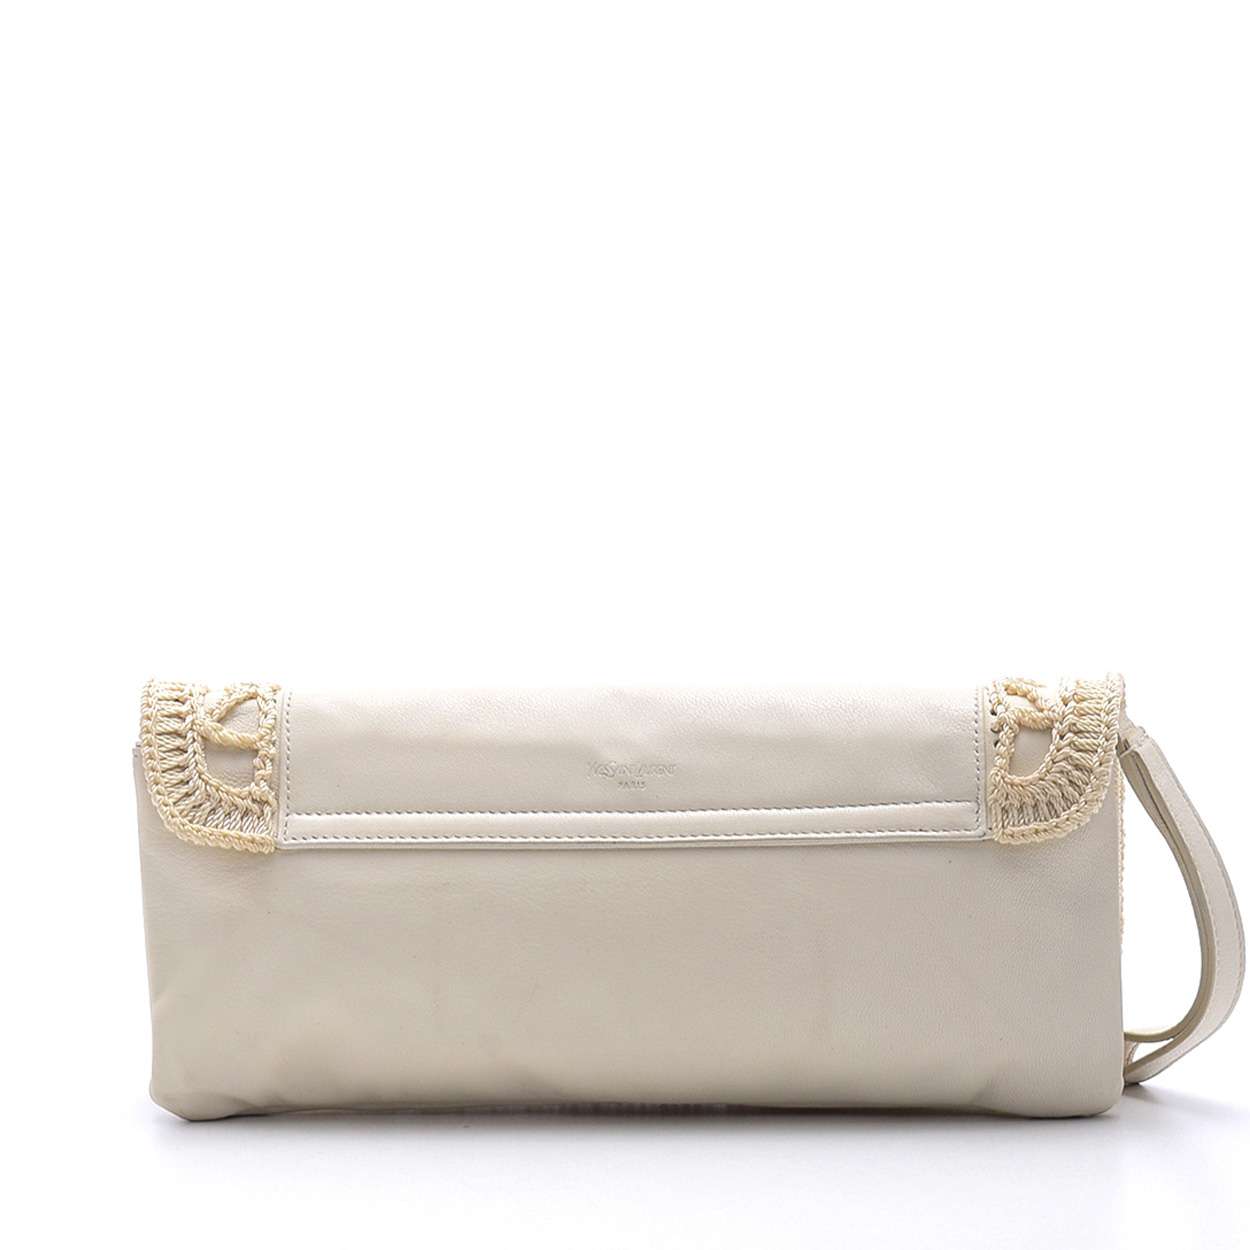 Yves Saint Laurent - White Leather Clutch 